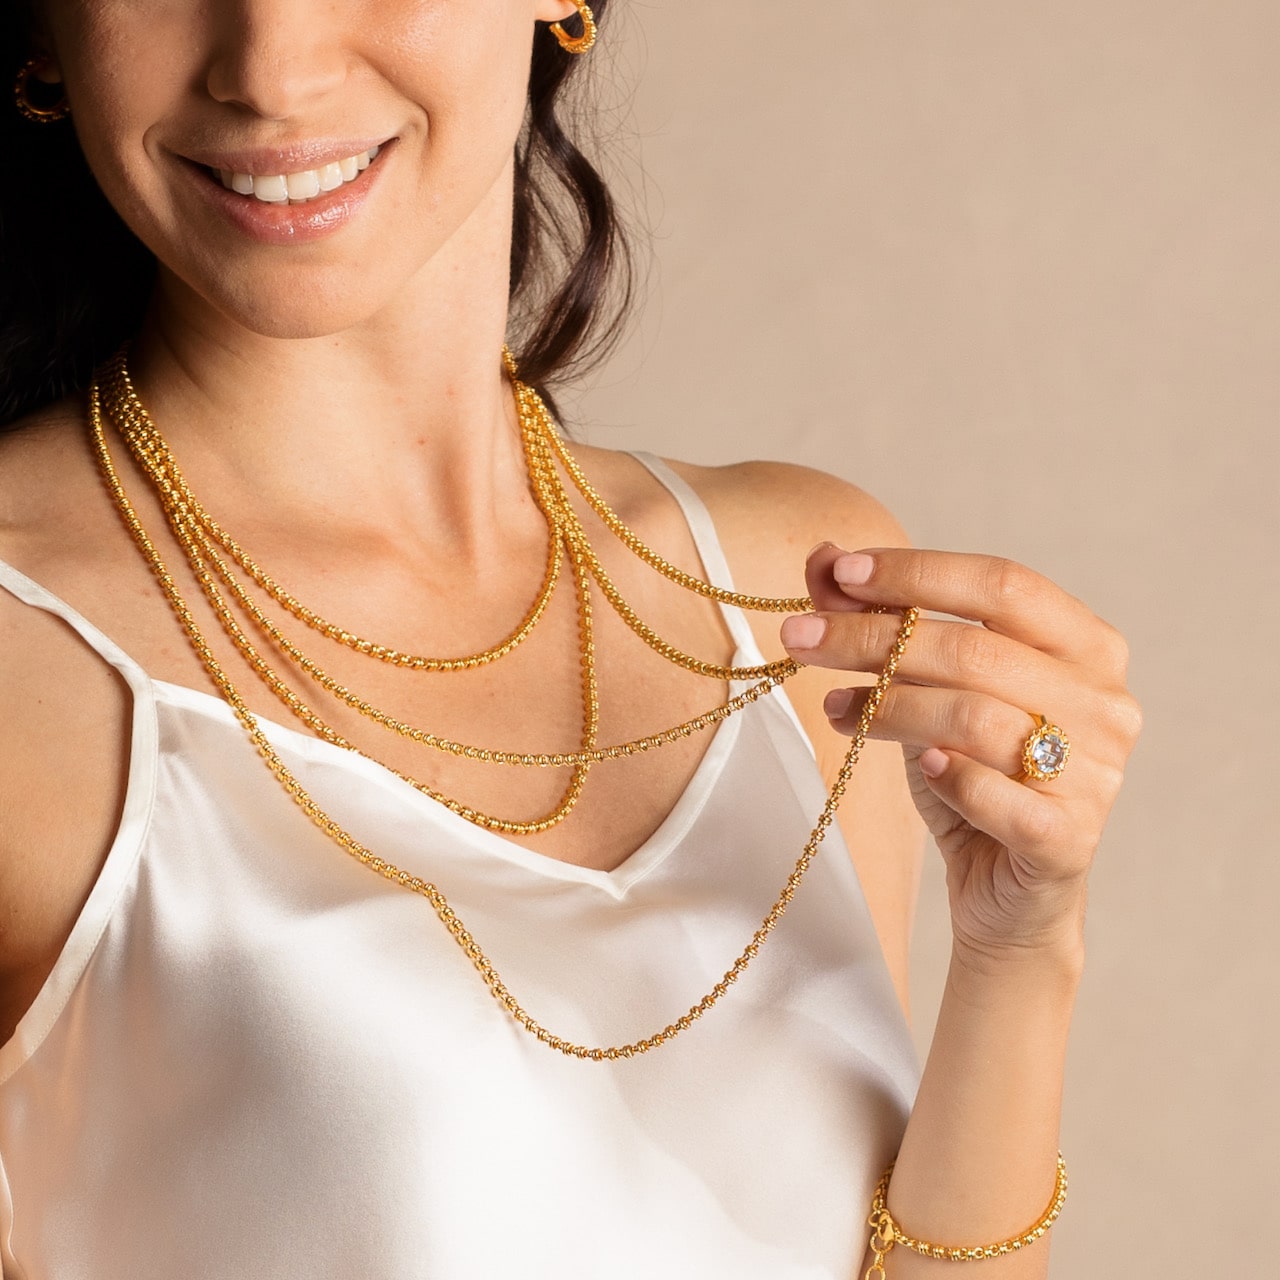 A model displaying four gold chains in varying lengths from a short, 16-inch gold chain to a 36-inch gold chain with matching gold earrings and a gold ring in the same iconic chain design around a semi-precious gemstone. All hand-crafted Italian jewelry is made by DelBrenna Italian Jewelers in Tuscany. 